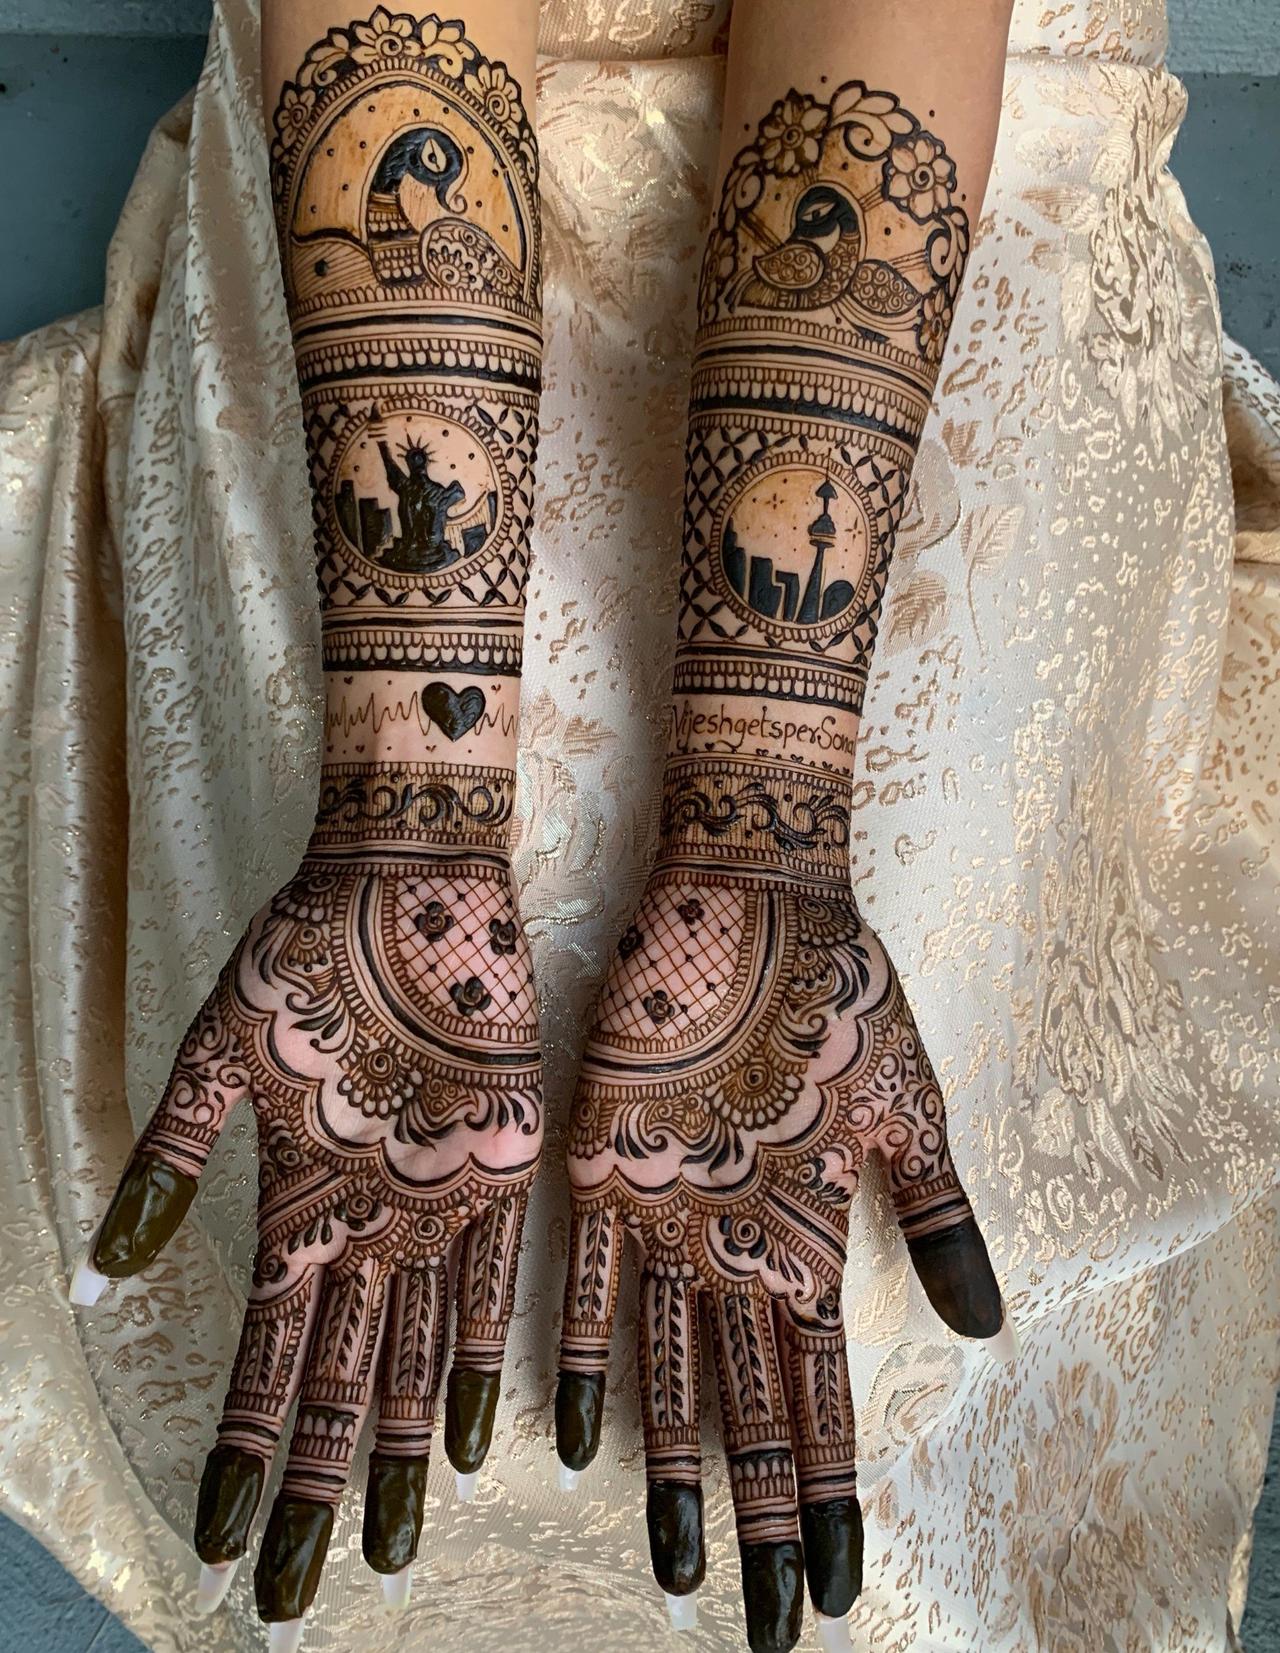 Latest Bridal Mehandi Designs 2021: Front and Back Hands